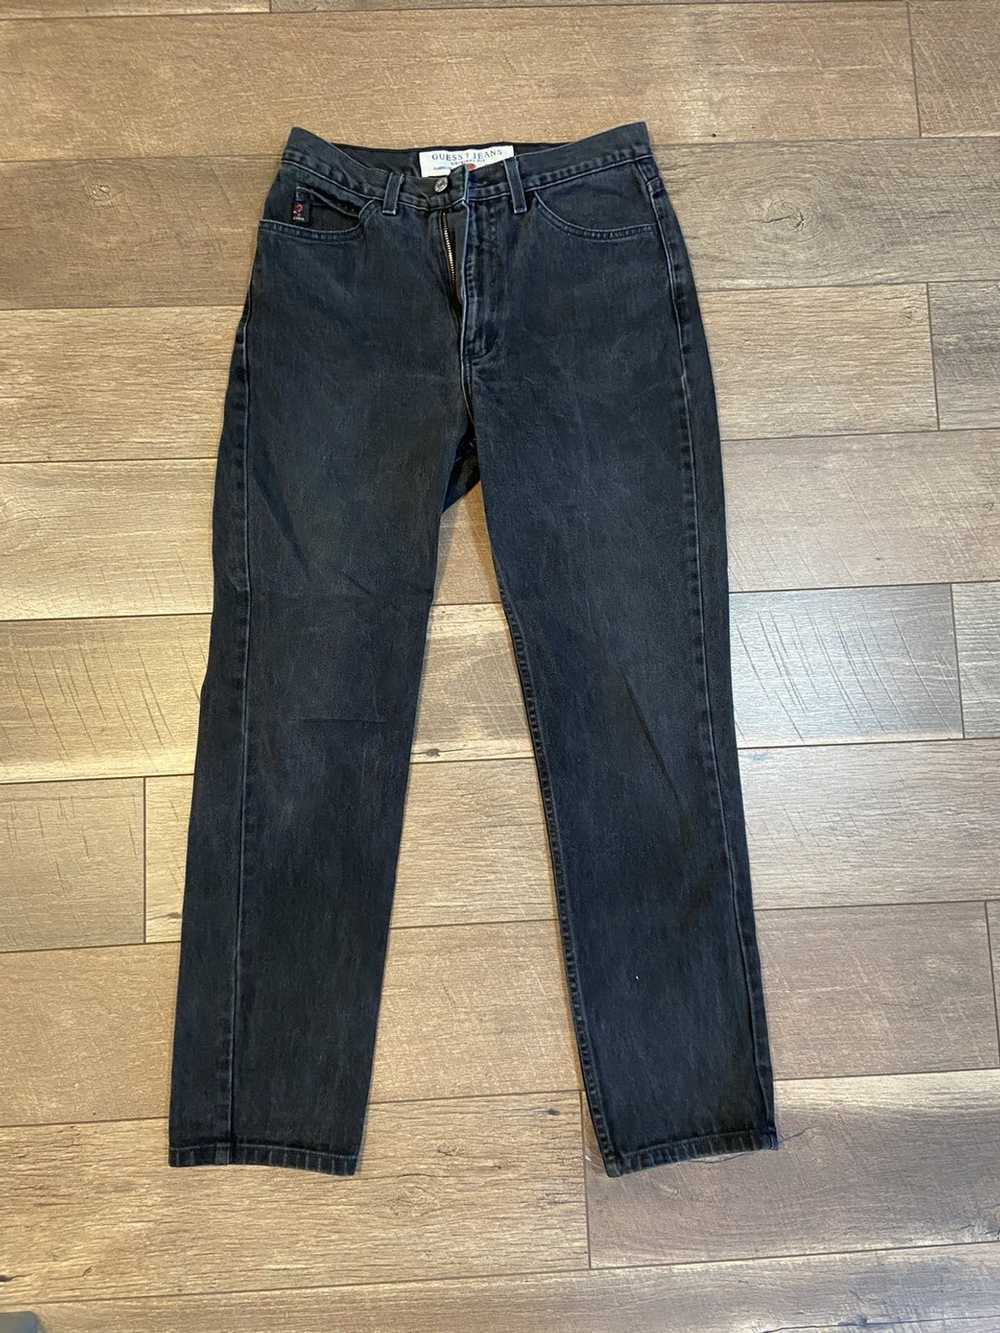 Guess Vintage Guess jeans - image 1